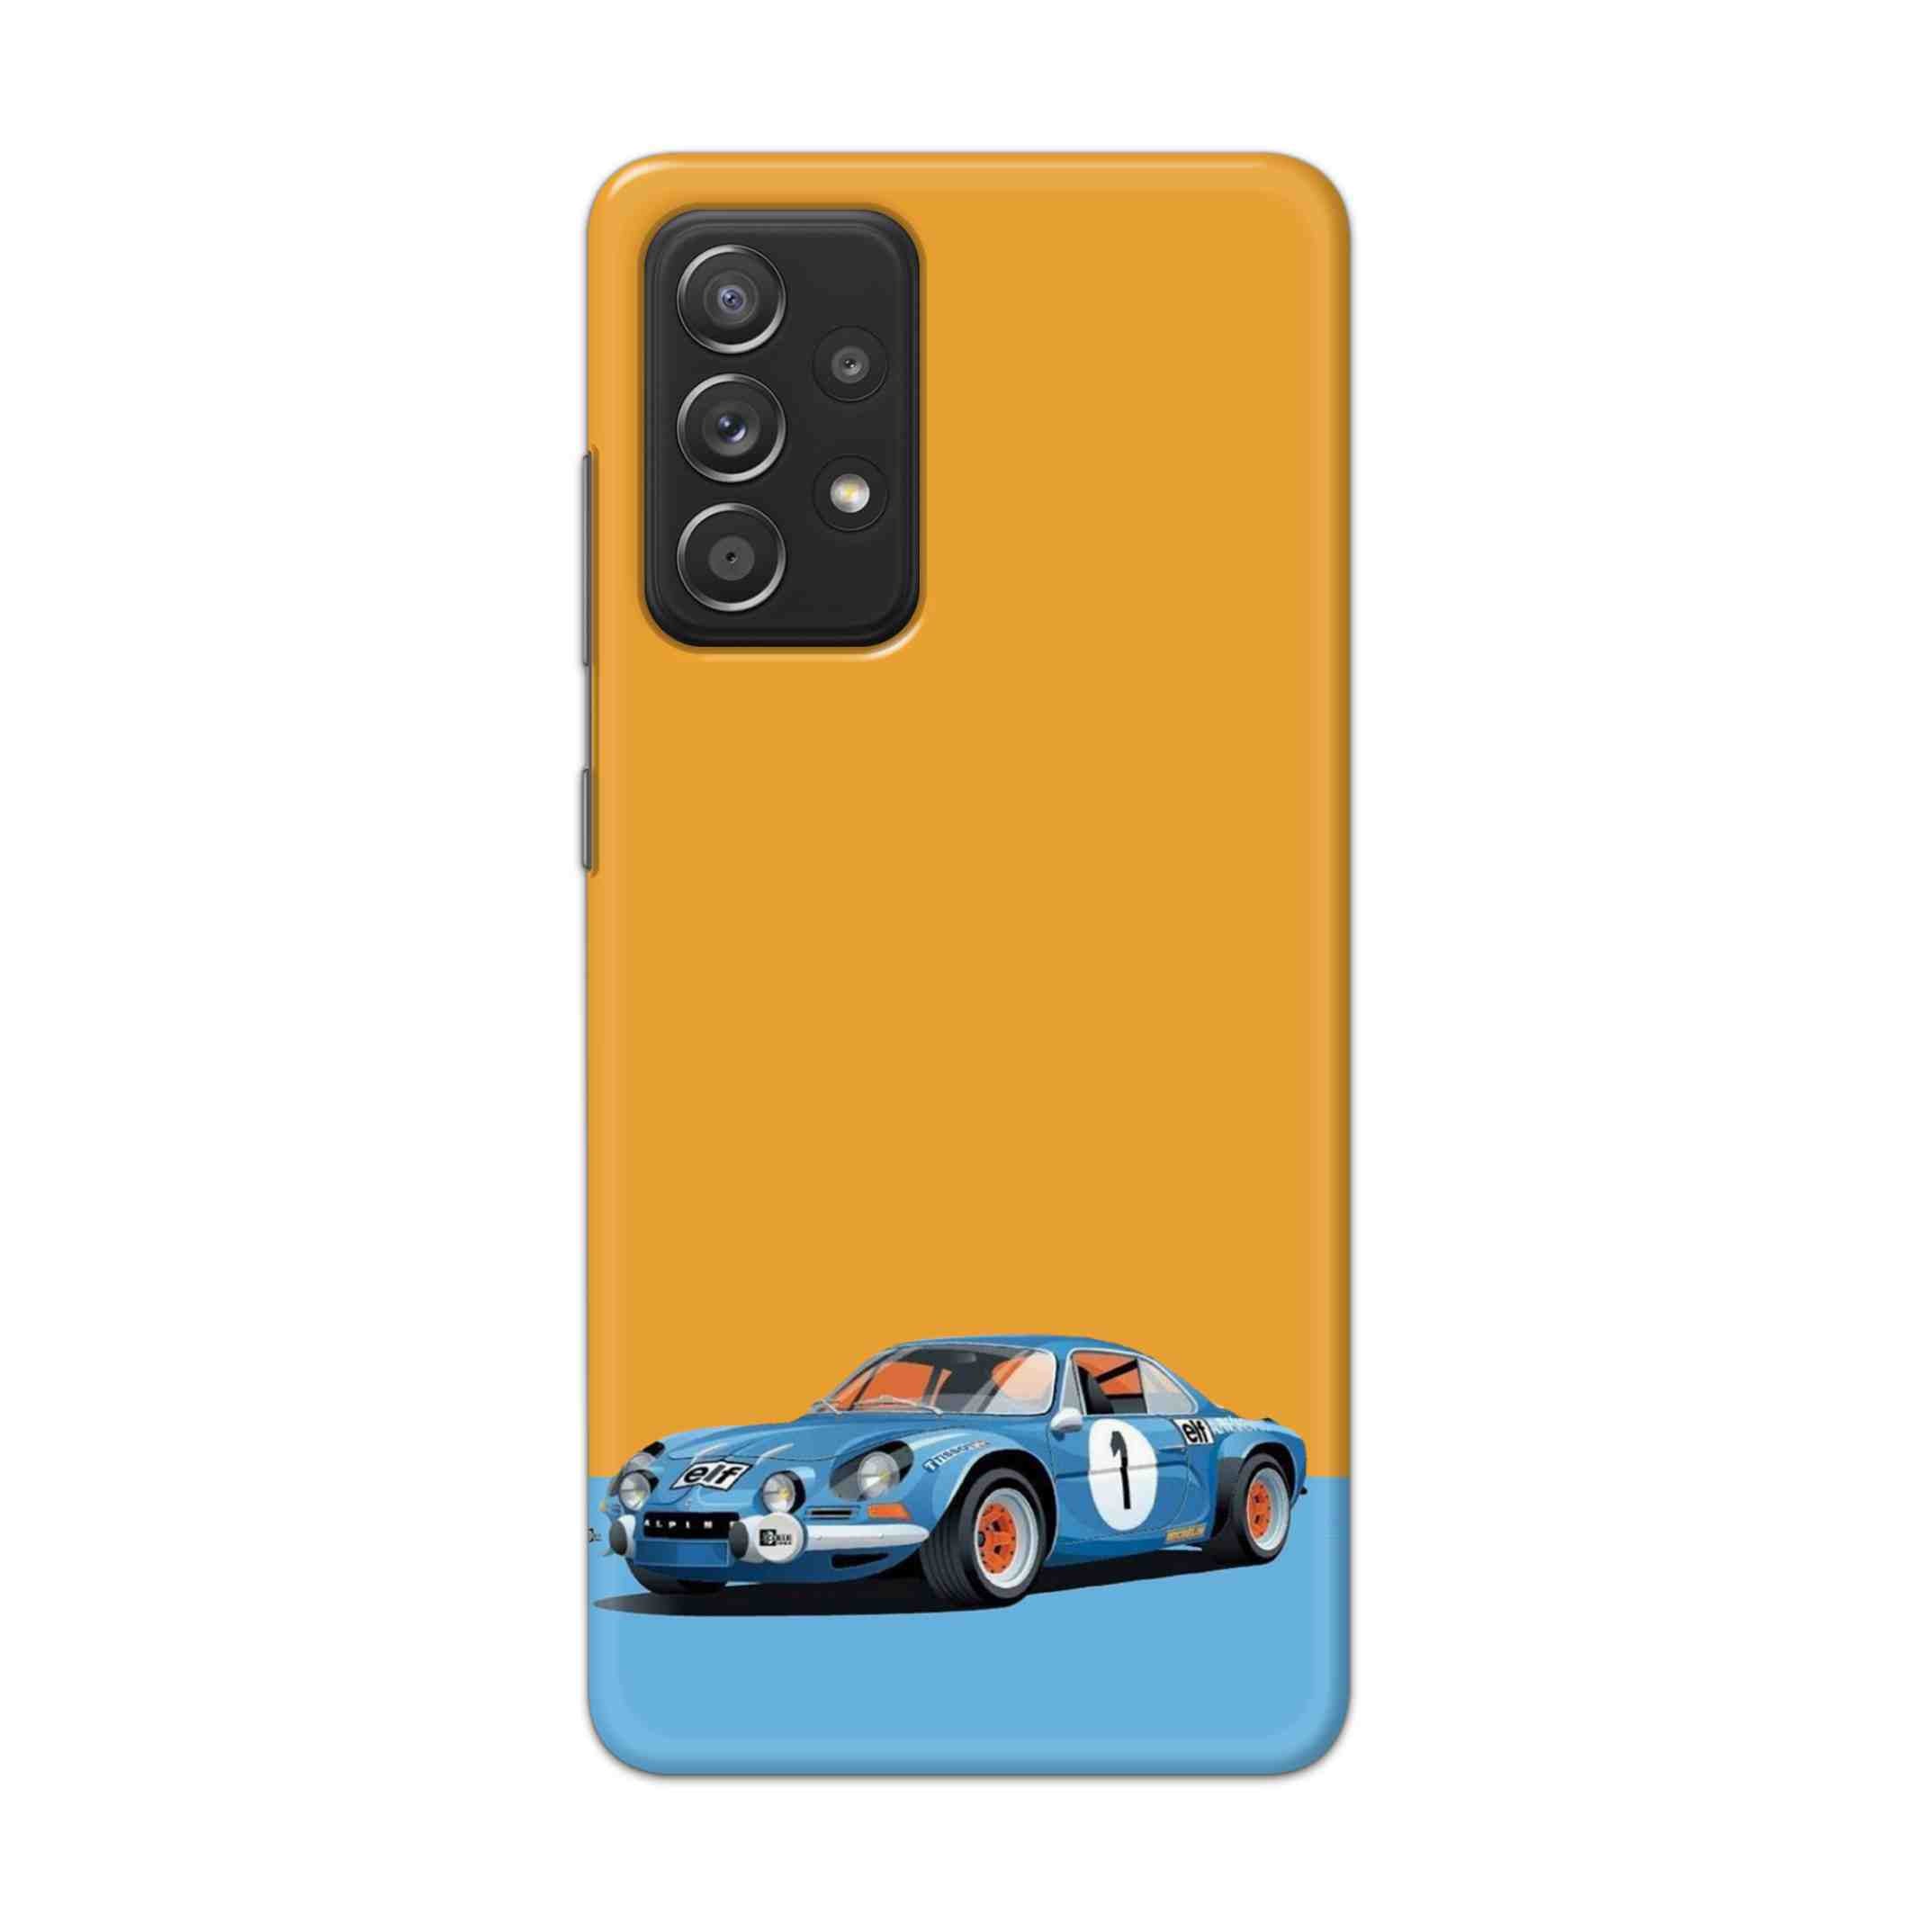 Buy Ferrari F1 Hard Back Mobile Phone Case Cover For Samsung Galaxy A52 Online